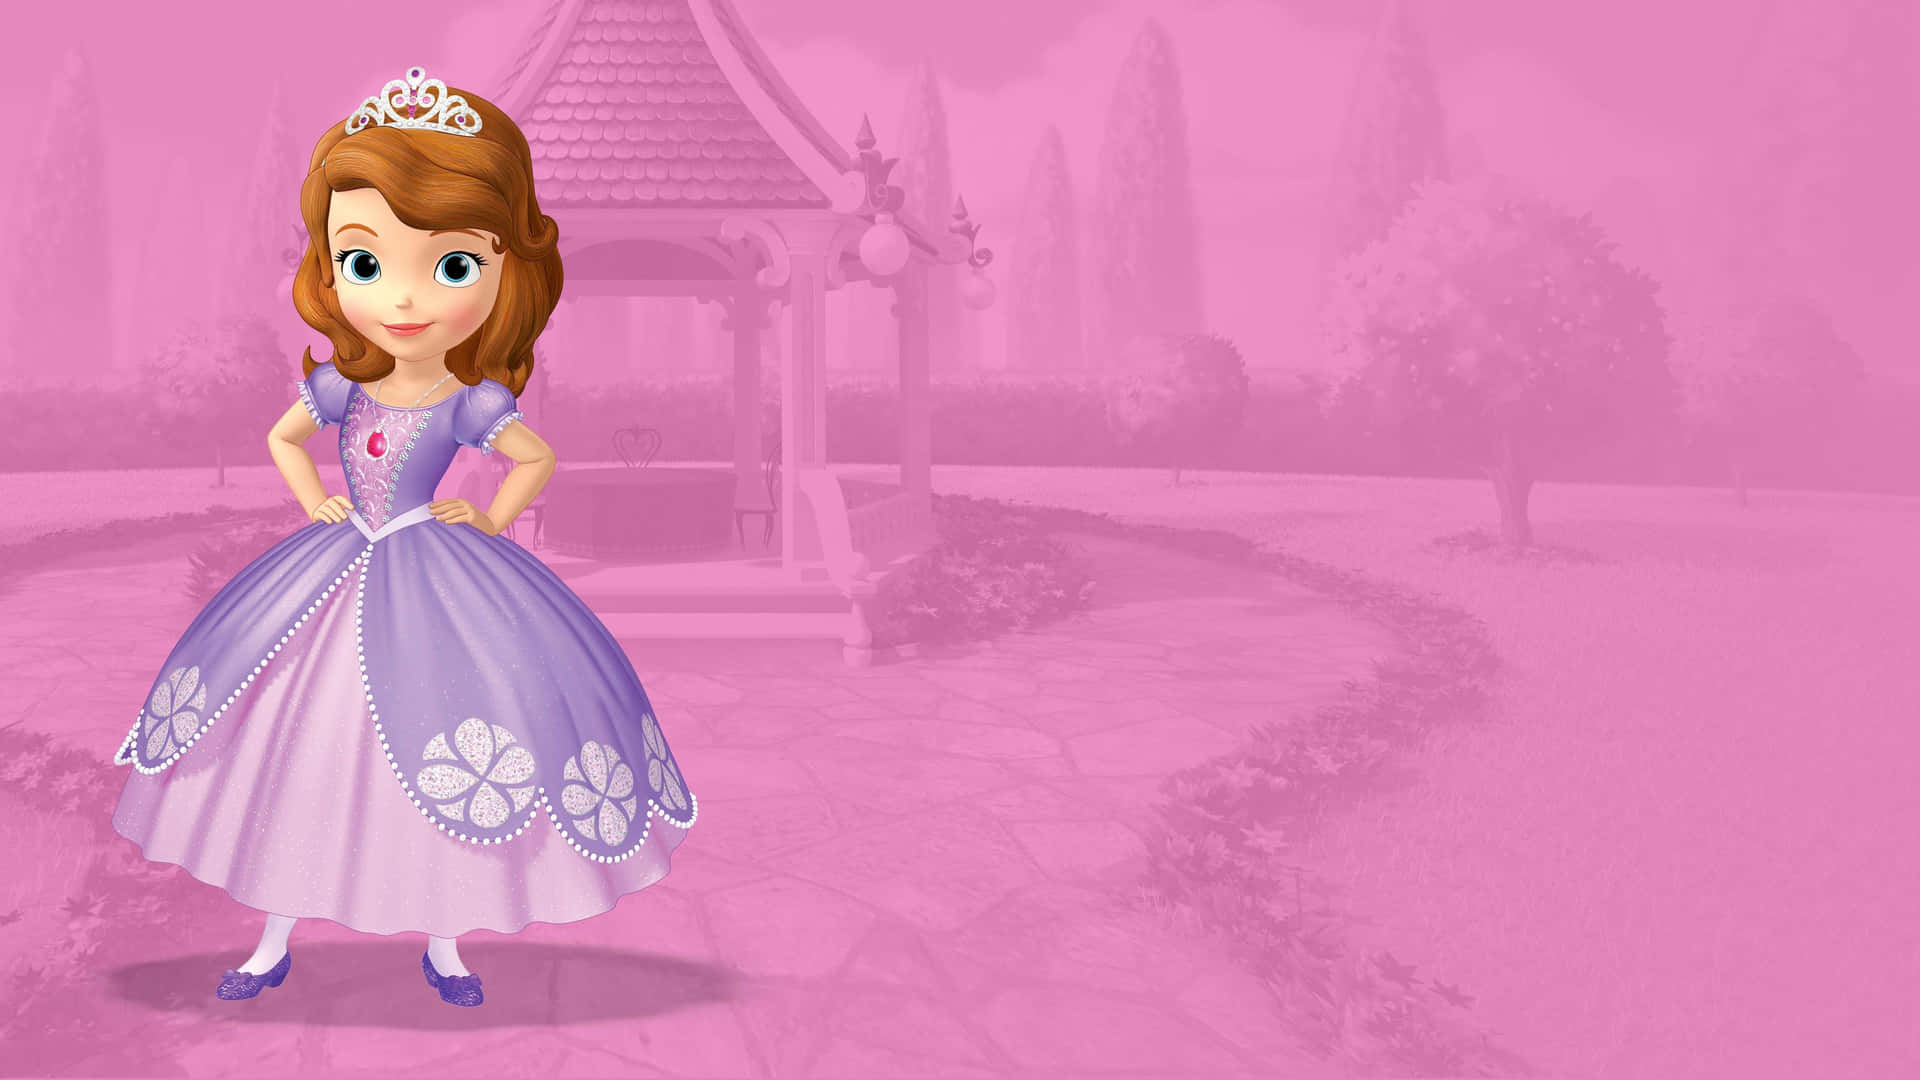 Sofia the First - Ready For Any Adventure Wallpaper